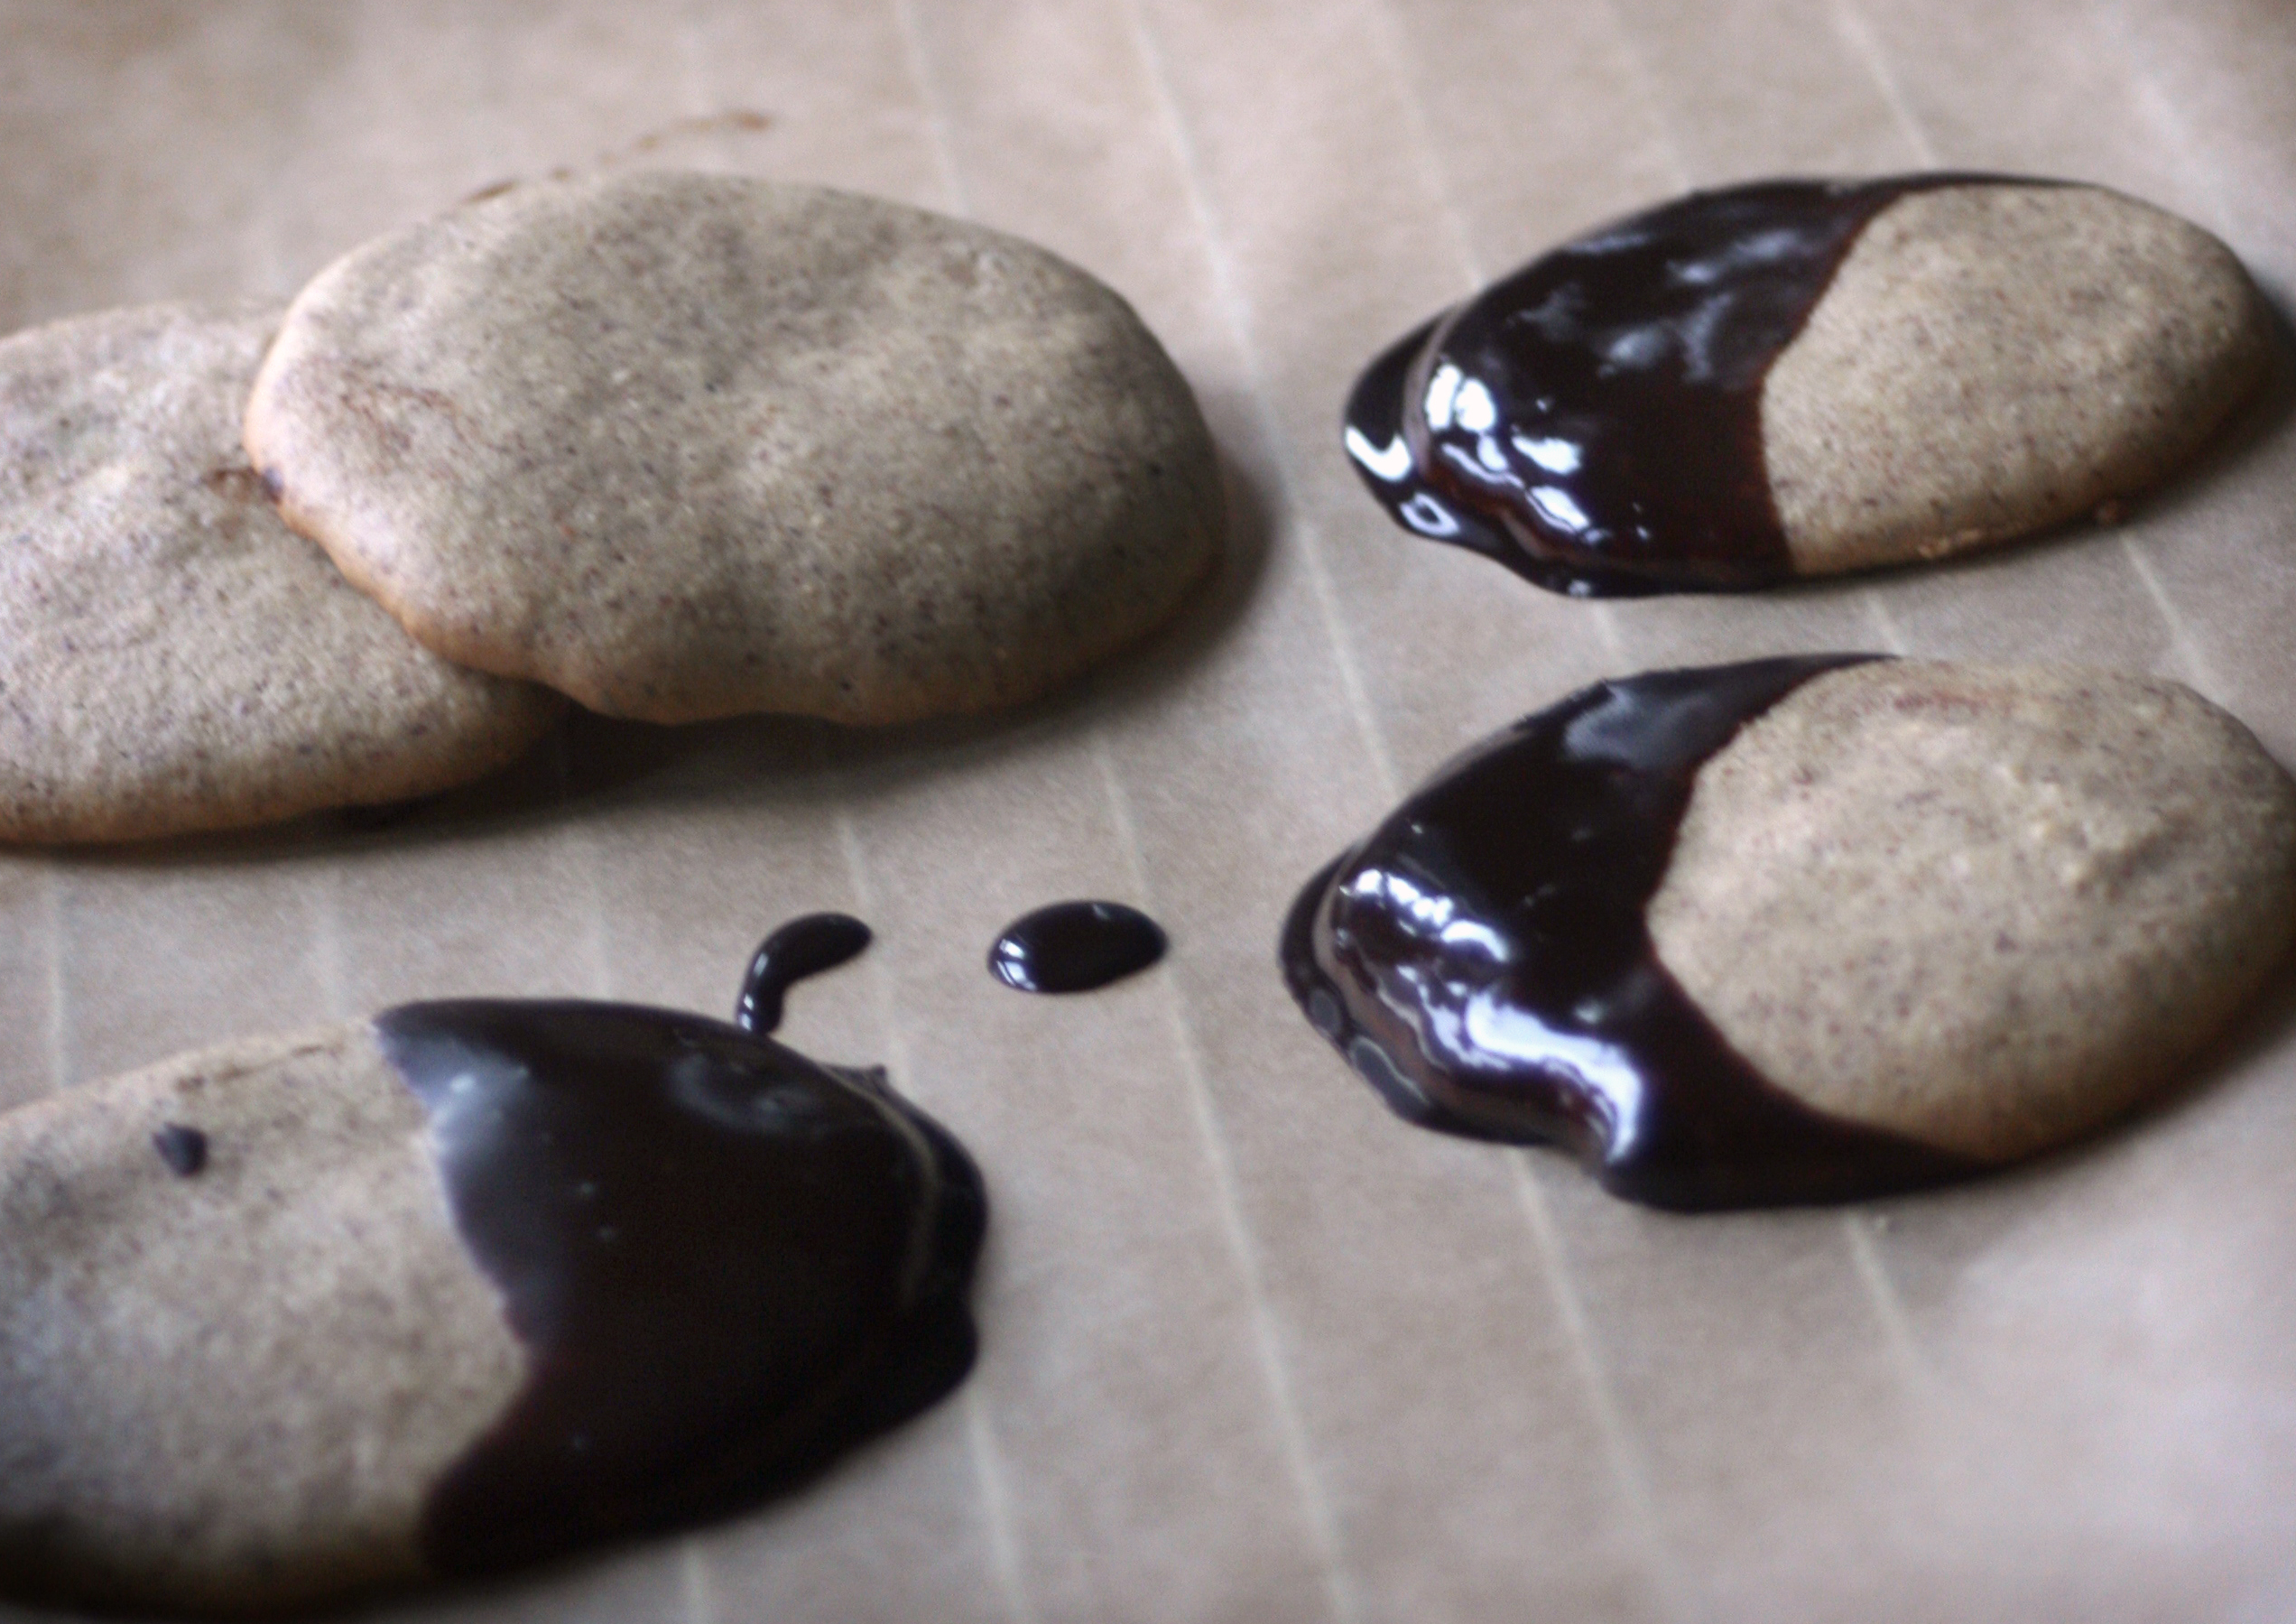 Three Ingredient Chocolate Sauce with coconut oil | Radiant Life Blog